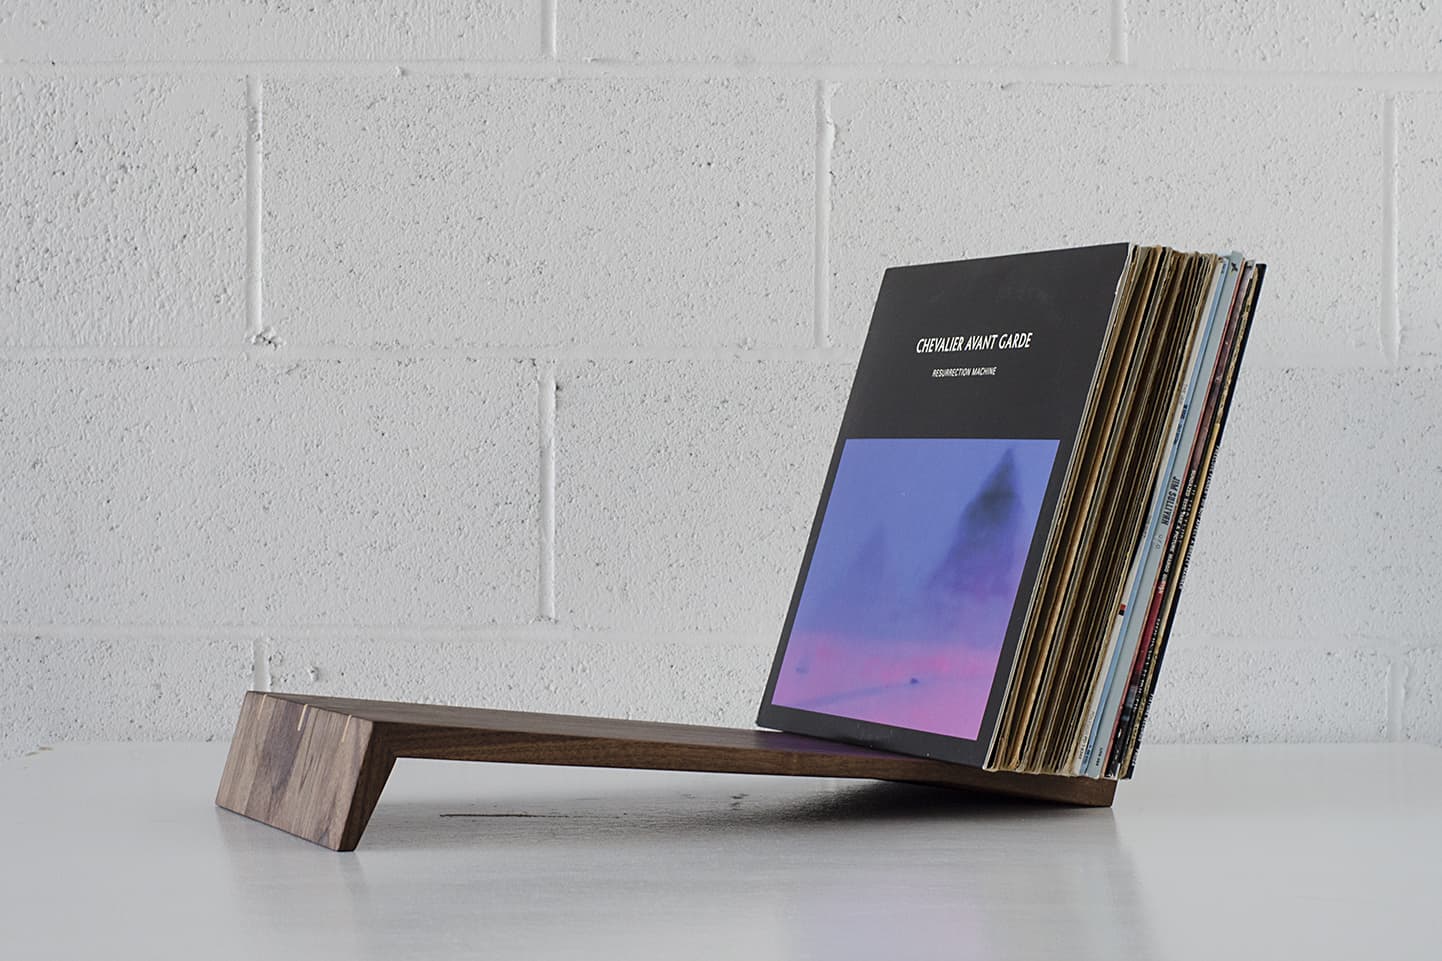 The table-top vinyl record stands